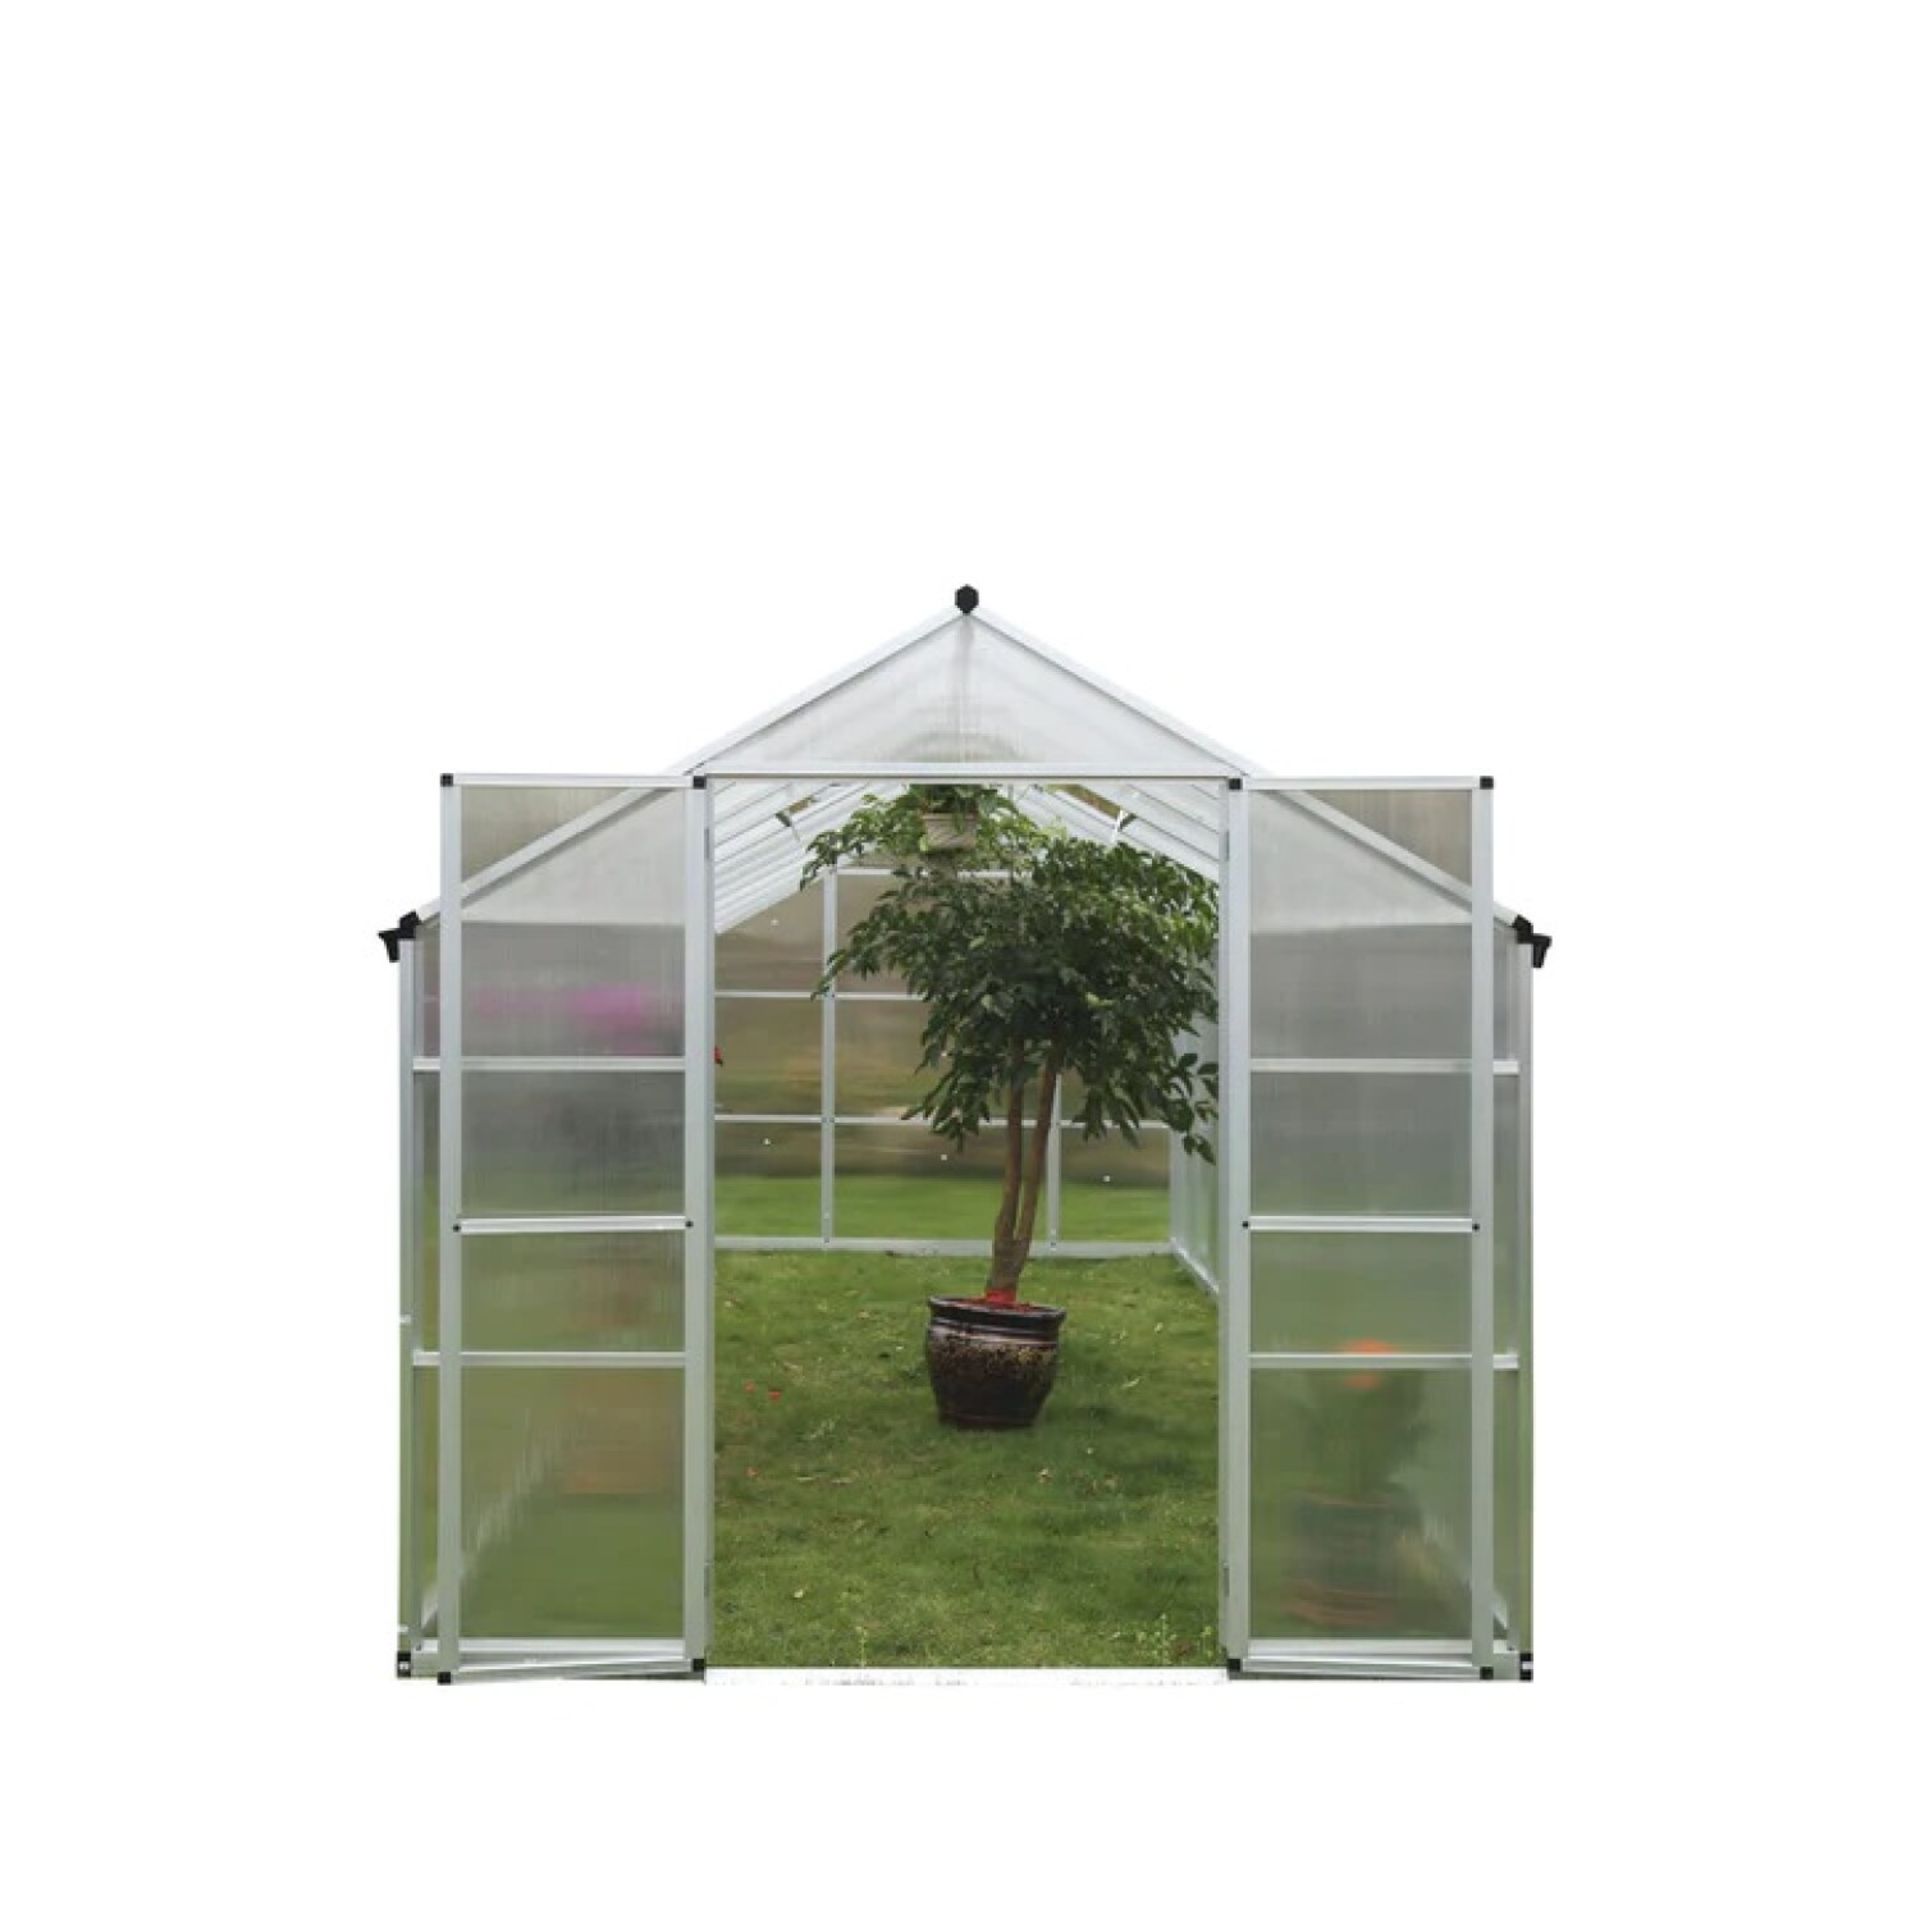 TMG-GH820 TMG INDUSTRIAL 8' X 20' ALUMINUM FRAME GREENHOUSE W/4 MM TWIN WALL POLYCARBONATE PANELS, - Image 2 of 7